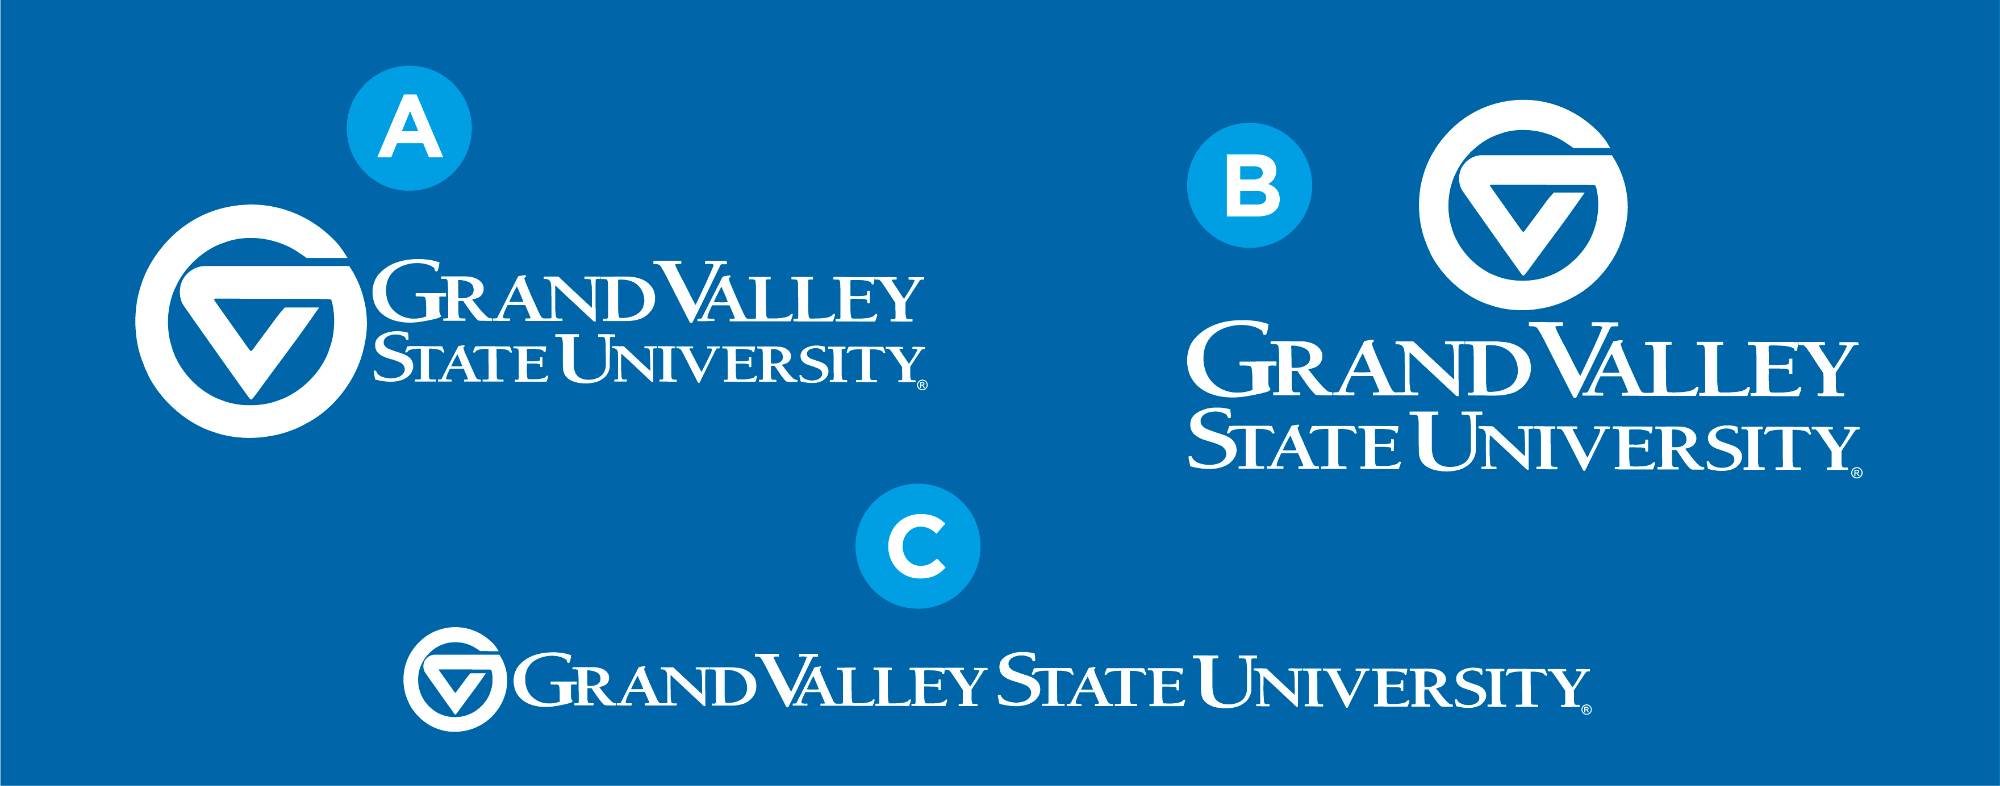 Three Grand Valley logos&#8212;one markleft, one marktop, one single-line. The letter "A" is next to the markleft logo, "B" is next to the marktop logo, and "C" is next to the single-line logo.